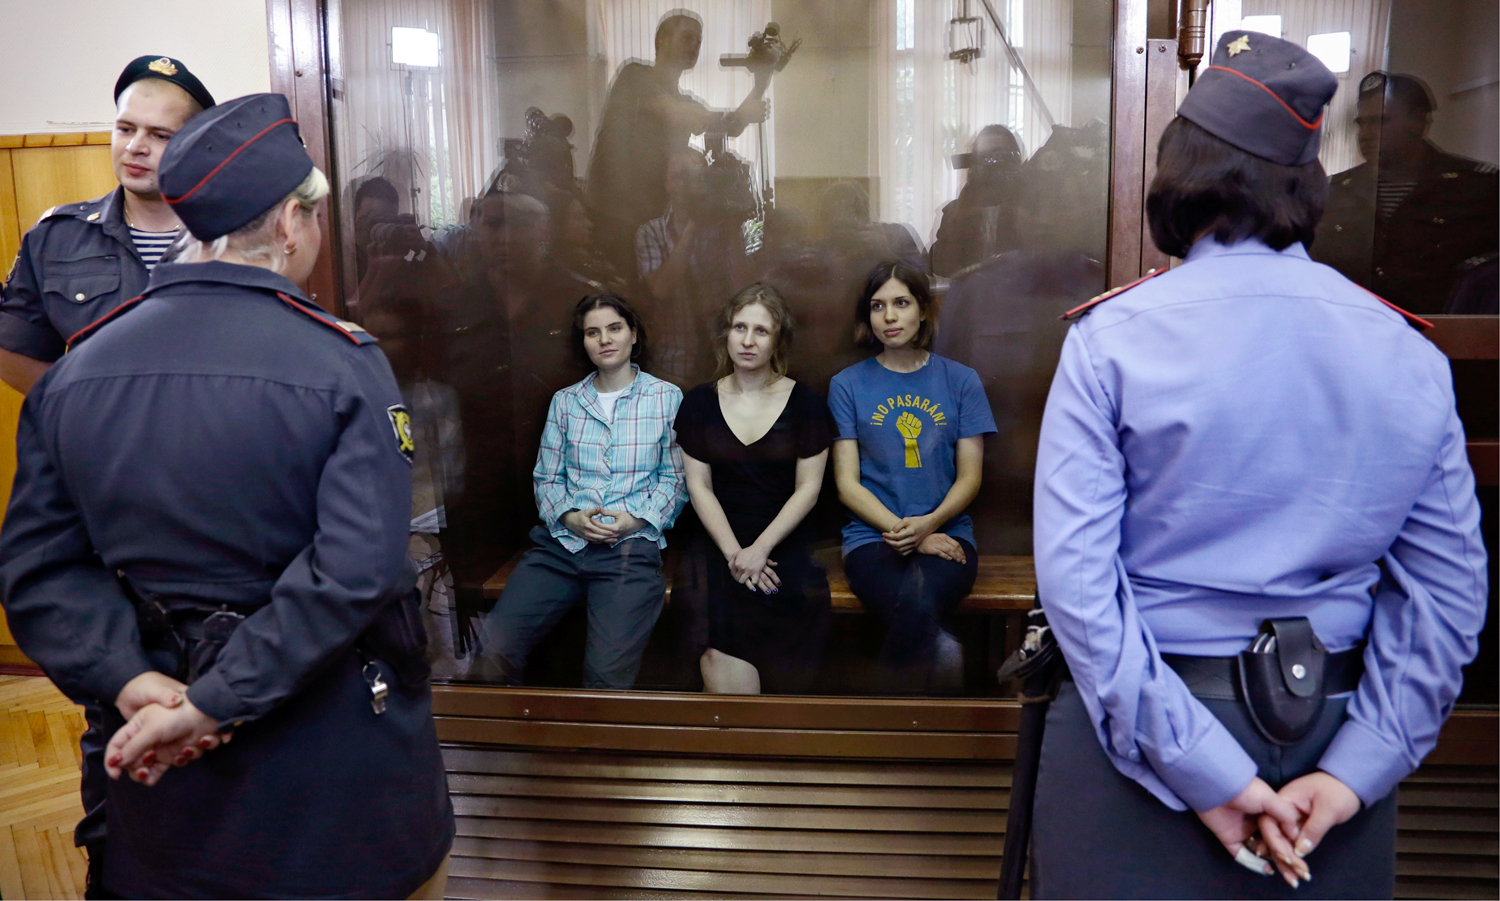 Feminist punk group Pussy Riot members, from left, Yekaterina Samutsevich, Maria Alekhina and Nadezhda Tolokonnikova sit in a glass cage at a court room in Moscow, Russia on Friday, Aug 17, 2012. The women, two of whom have young children, are charged with hooliganism connected to religious hatred but the case is widely seen as a warning that authorities will only tolerate opposition under tightly controlled conditions. T-shirt on right worn by Tolokonnikova is Spanish and translates to "They shall not pass", a slogan often used to express determination to defend a position against an enemy. (AP Photo/Sergey Ponomarev)